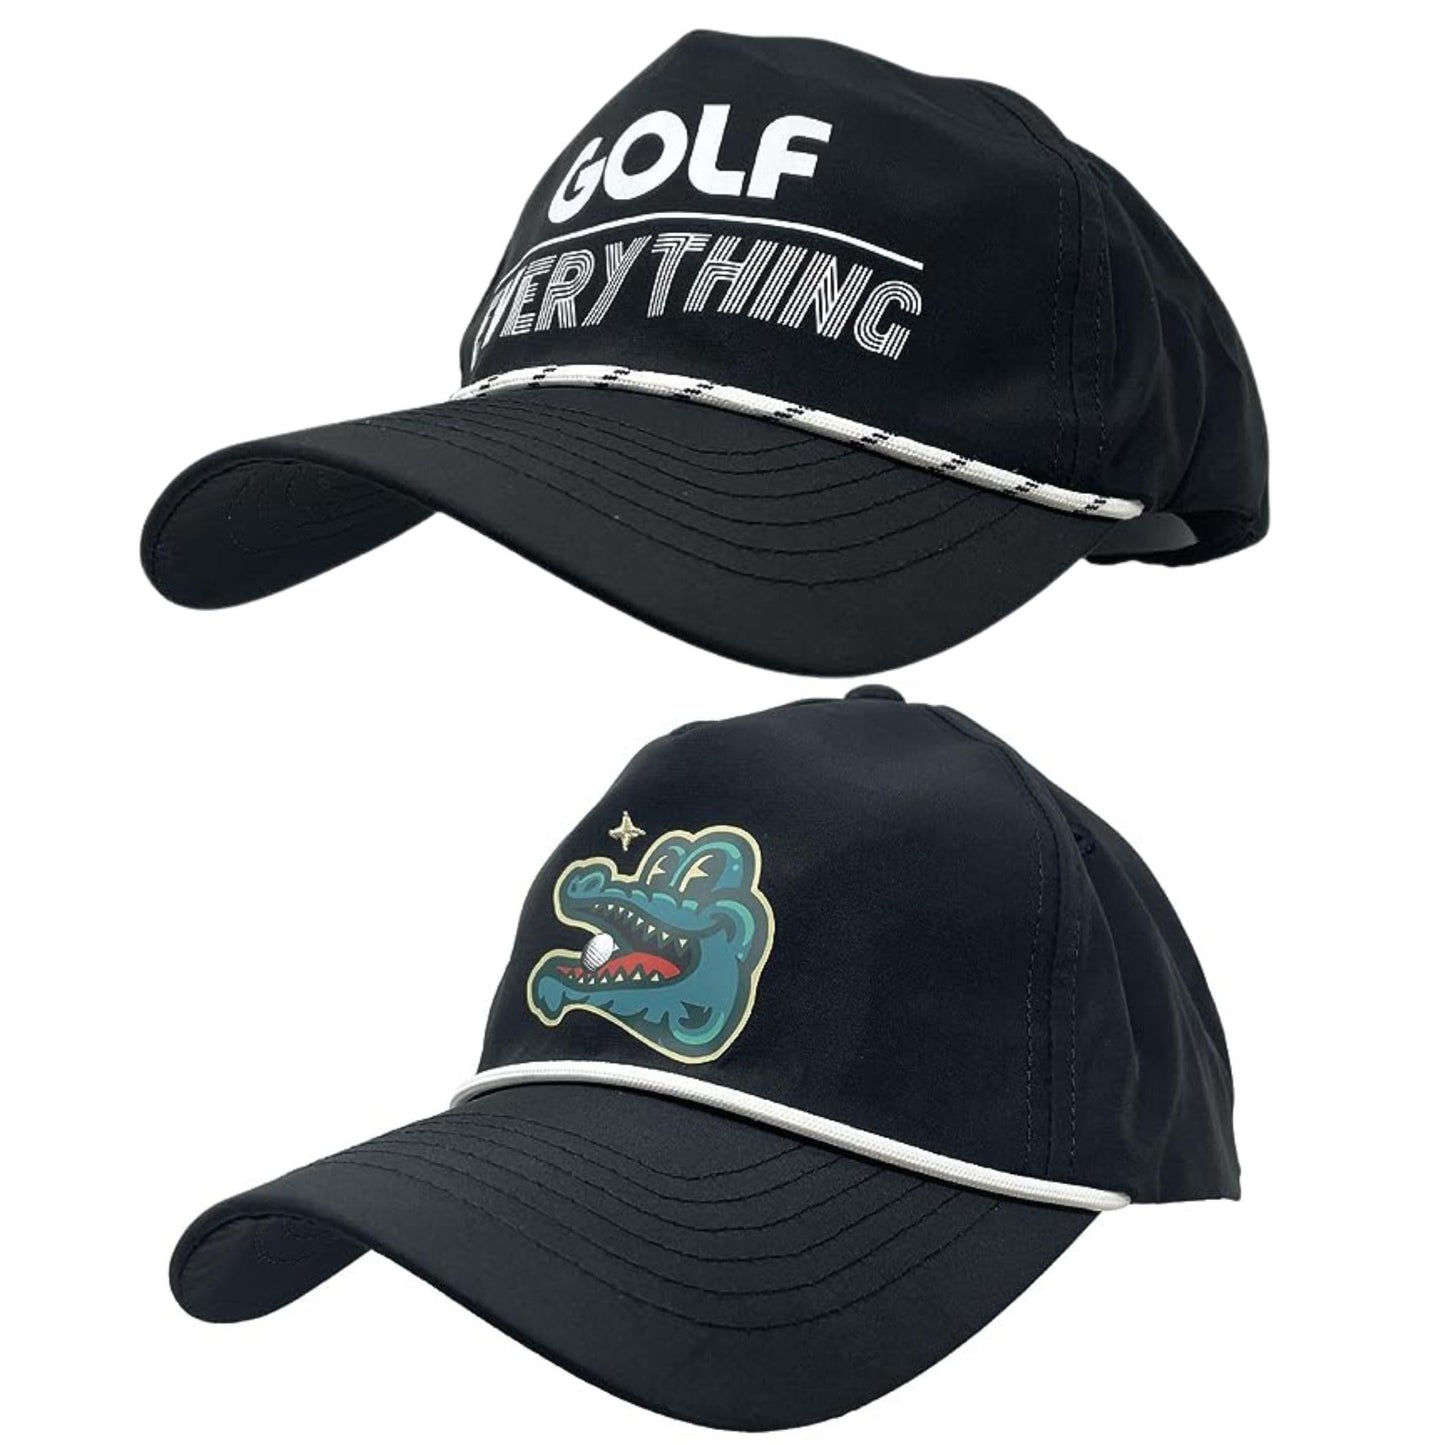 Retro Rope Golf Hats by Funky Junque